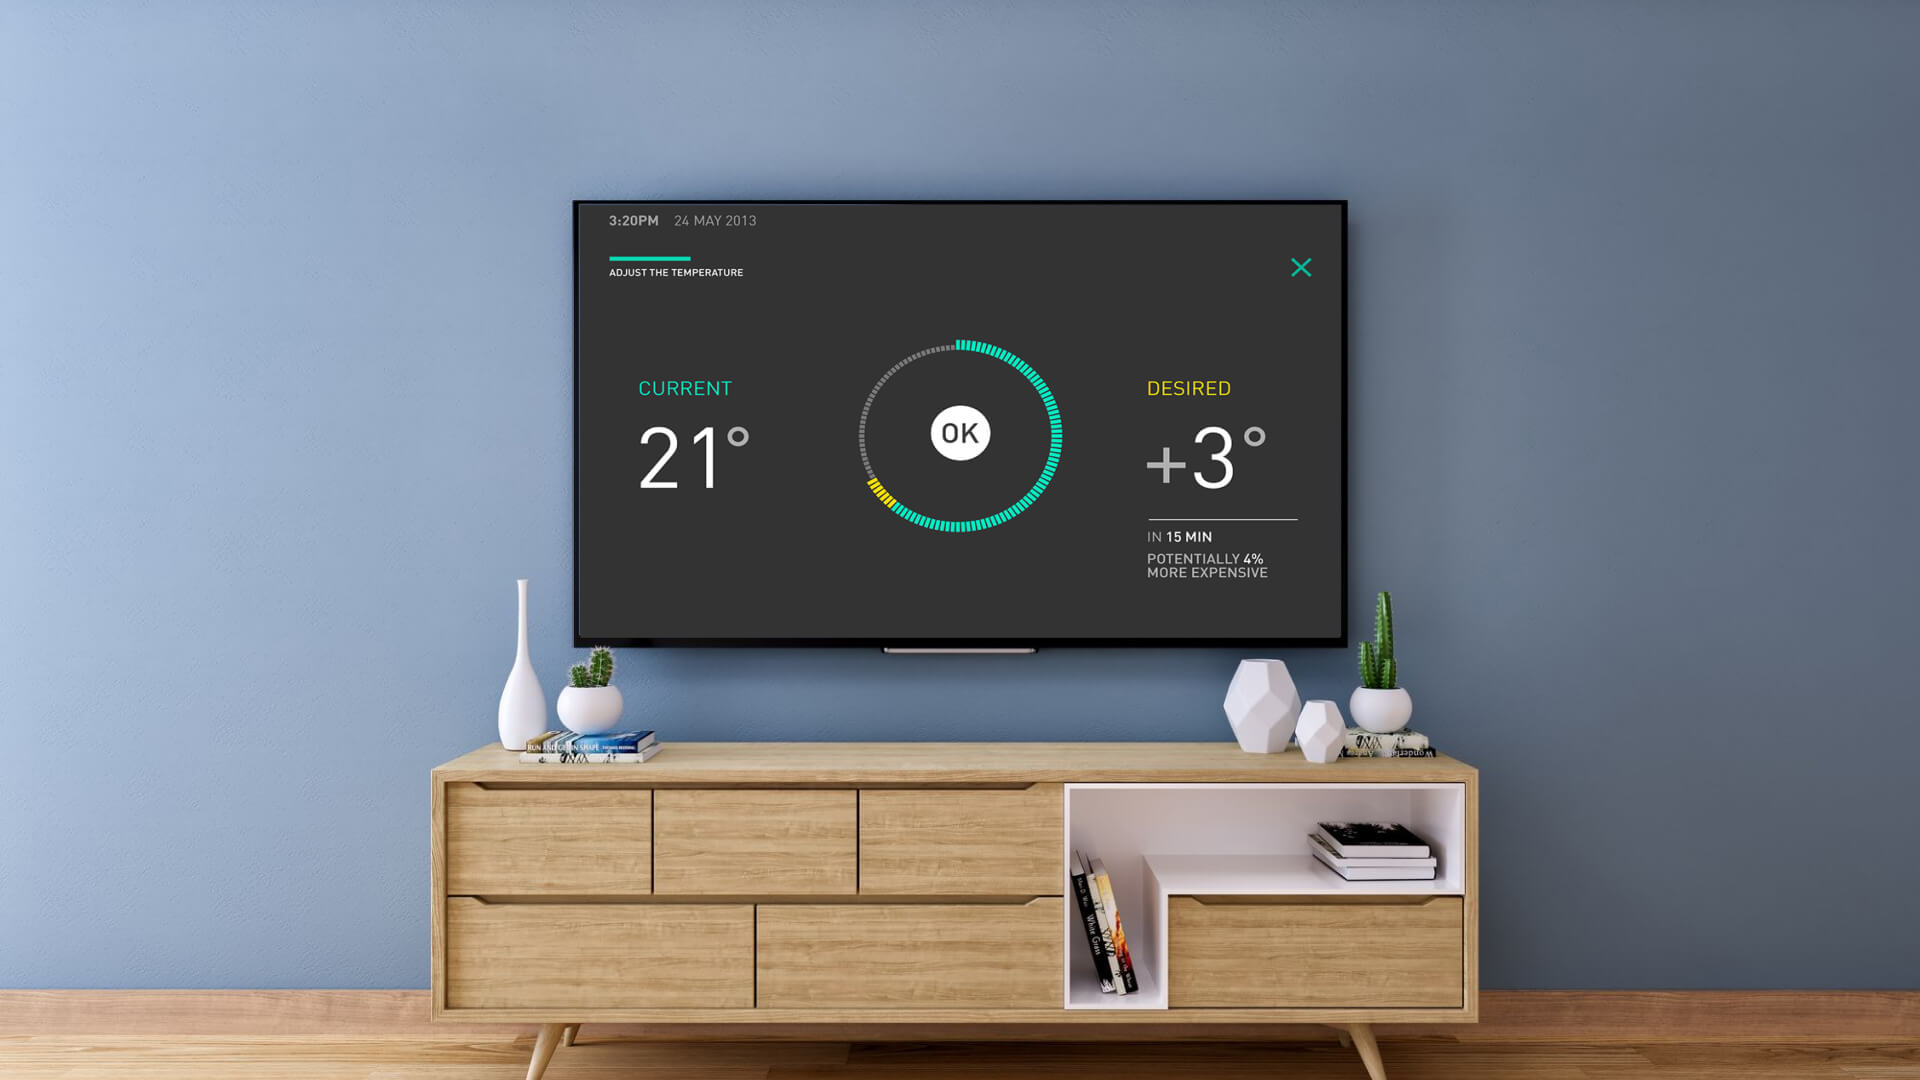  A home digital signage screen showing energy consumption